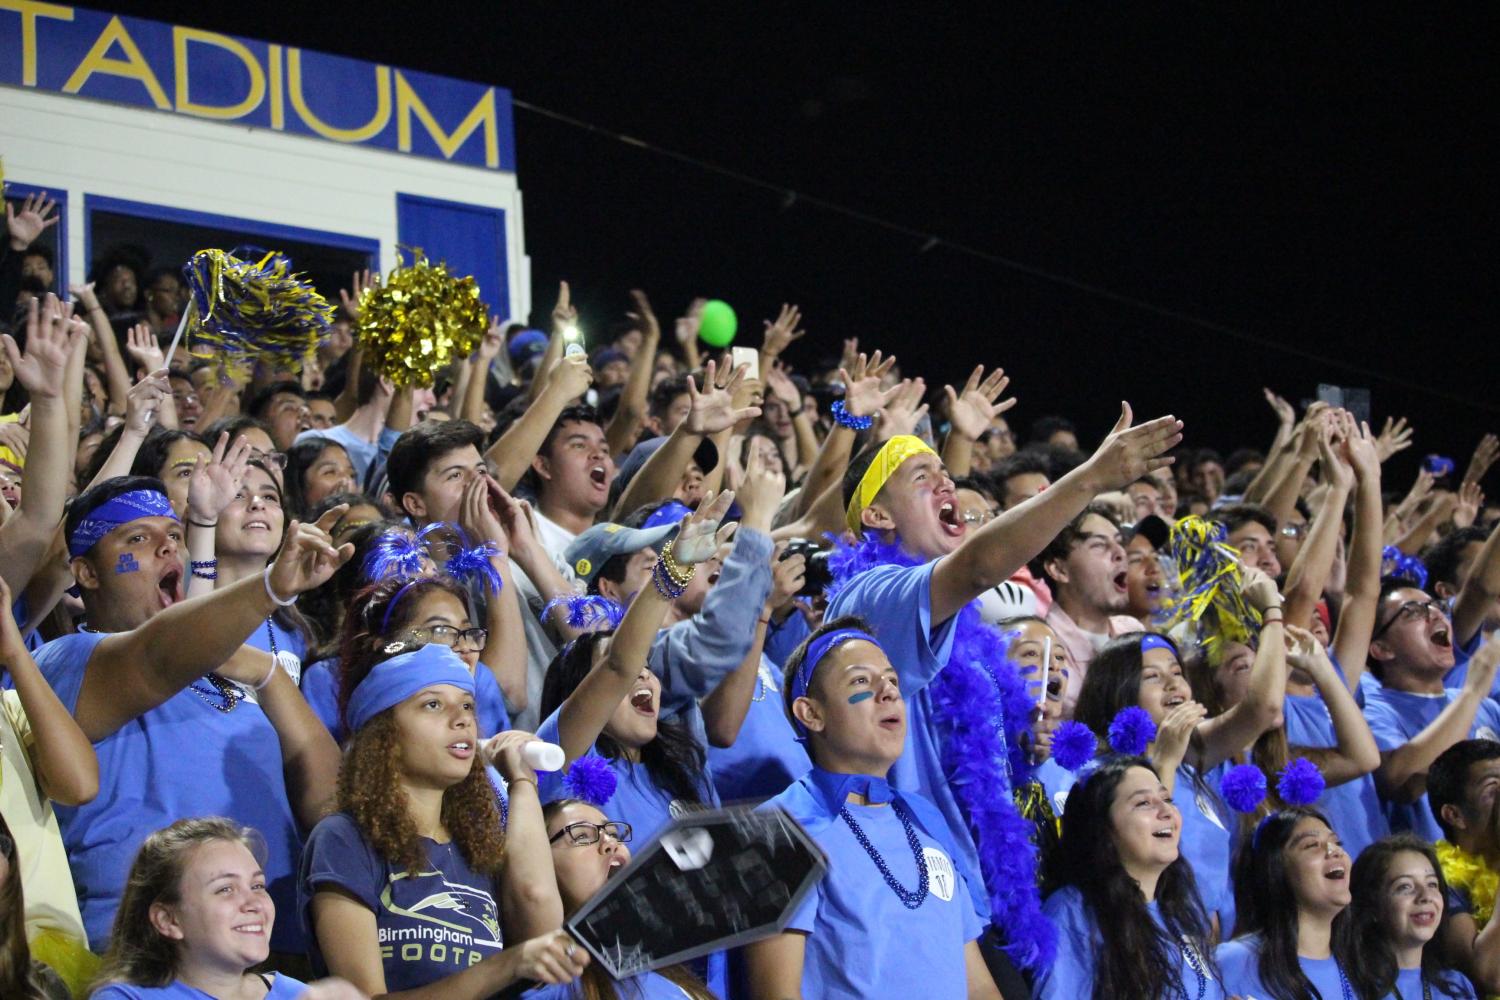 The student section at BCCHS react during the La Salle game.